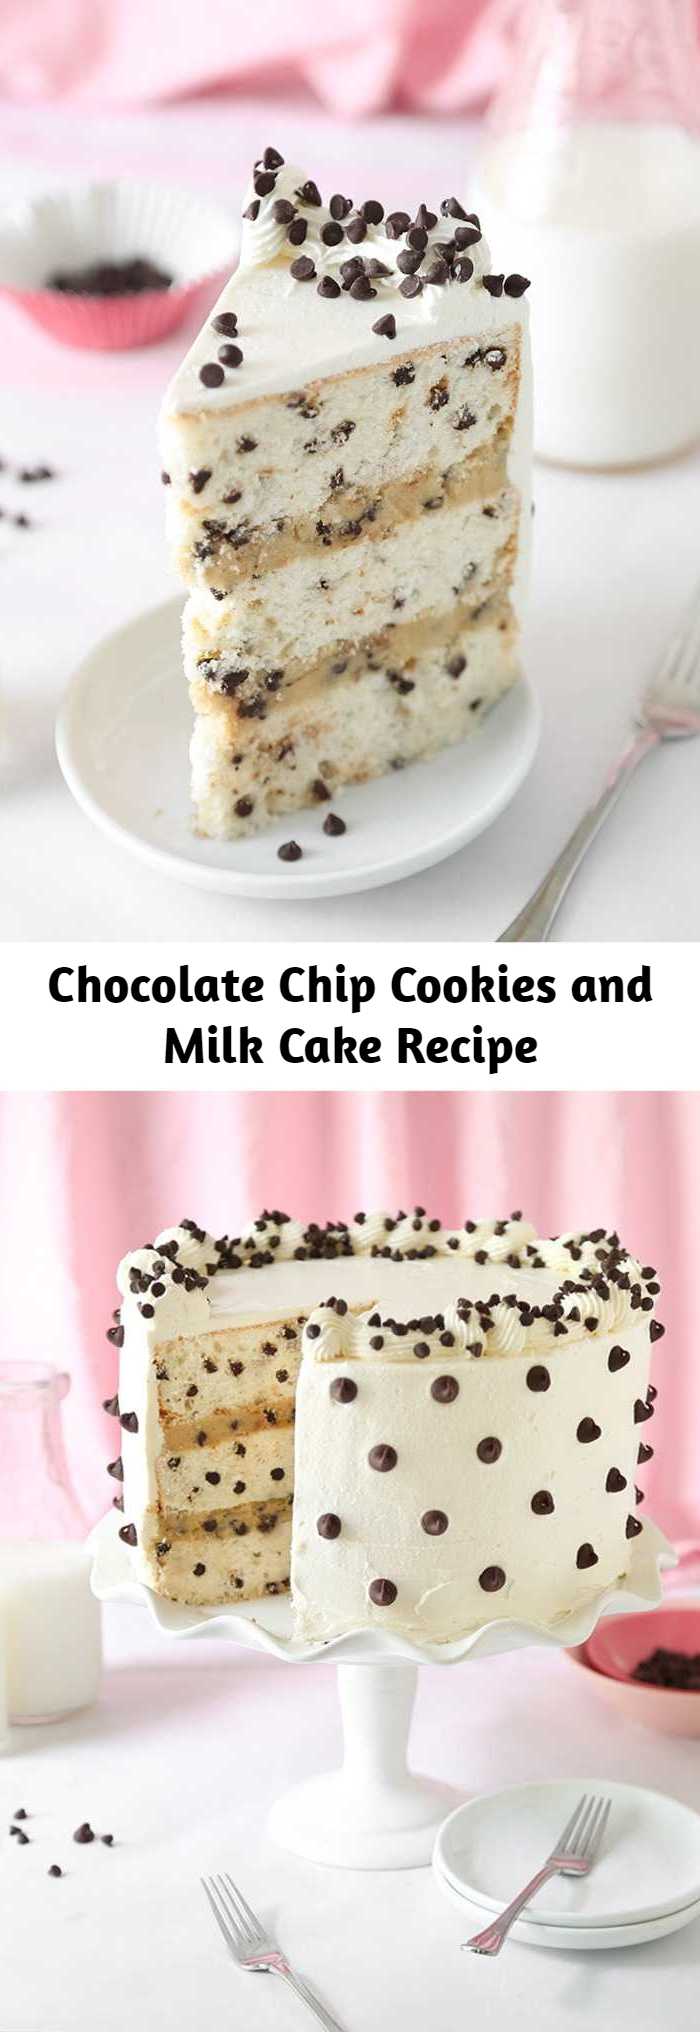 Chocolate Chip Cookies and Milk Cake Recipe - This cake is made of three 9-inch white butter cake layers that are absolutely chock-full of mini chocolate chips. It is filled with fluffy chocolate chip cookie dough frosting and the entire cake is iced with boiled milk frosting. A handful of regular-sized chocolate chips are all lined up on the outside for an eye-catching, dotty appearance - it's some of the easiest cake decorating I've ever done!